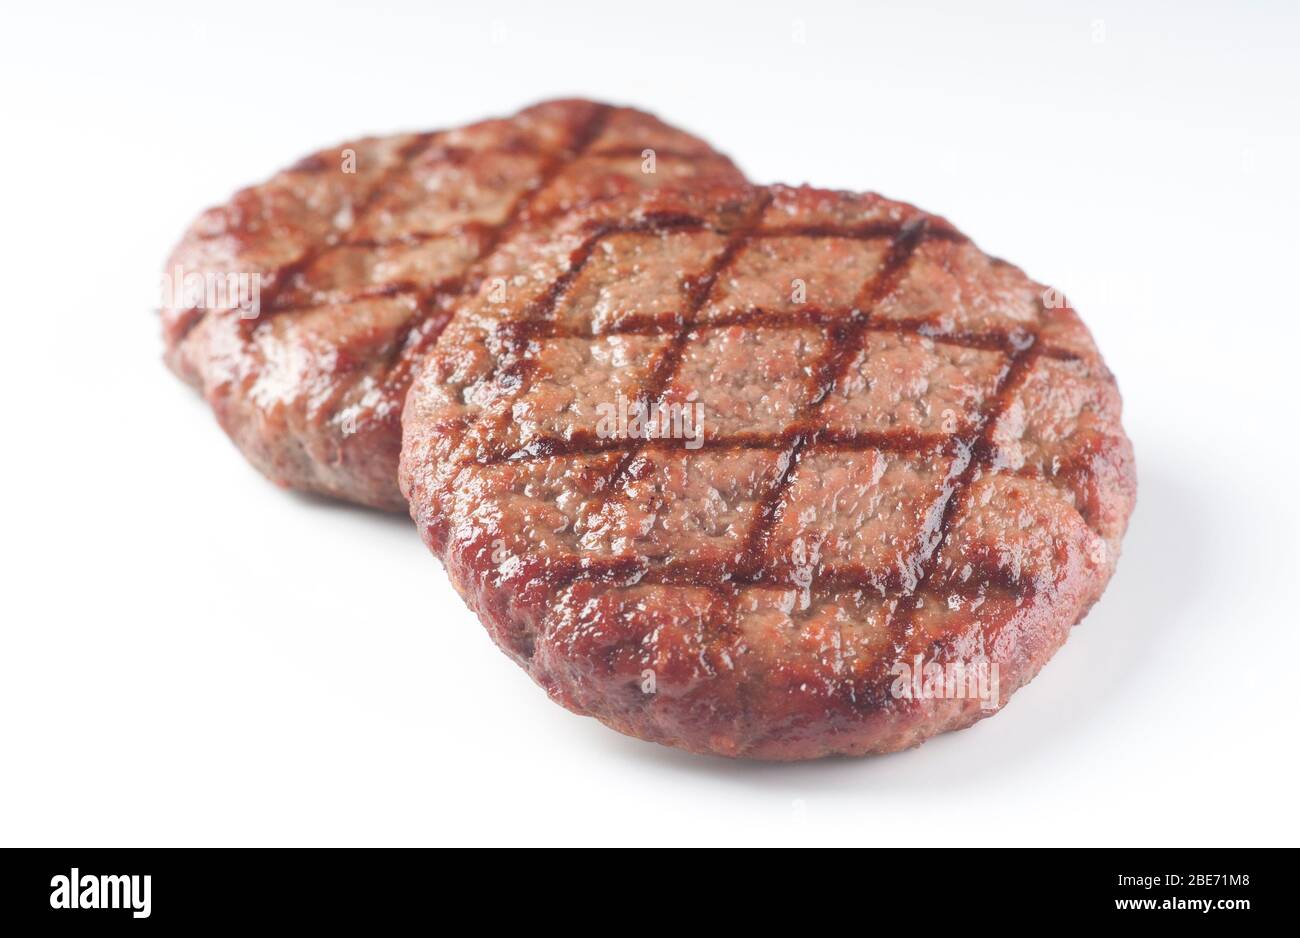 tasty grilled beef burger on a white background for graphic design Stock Photo